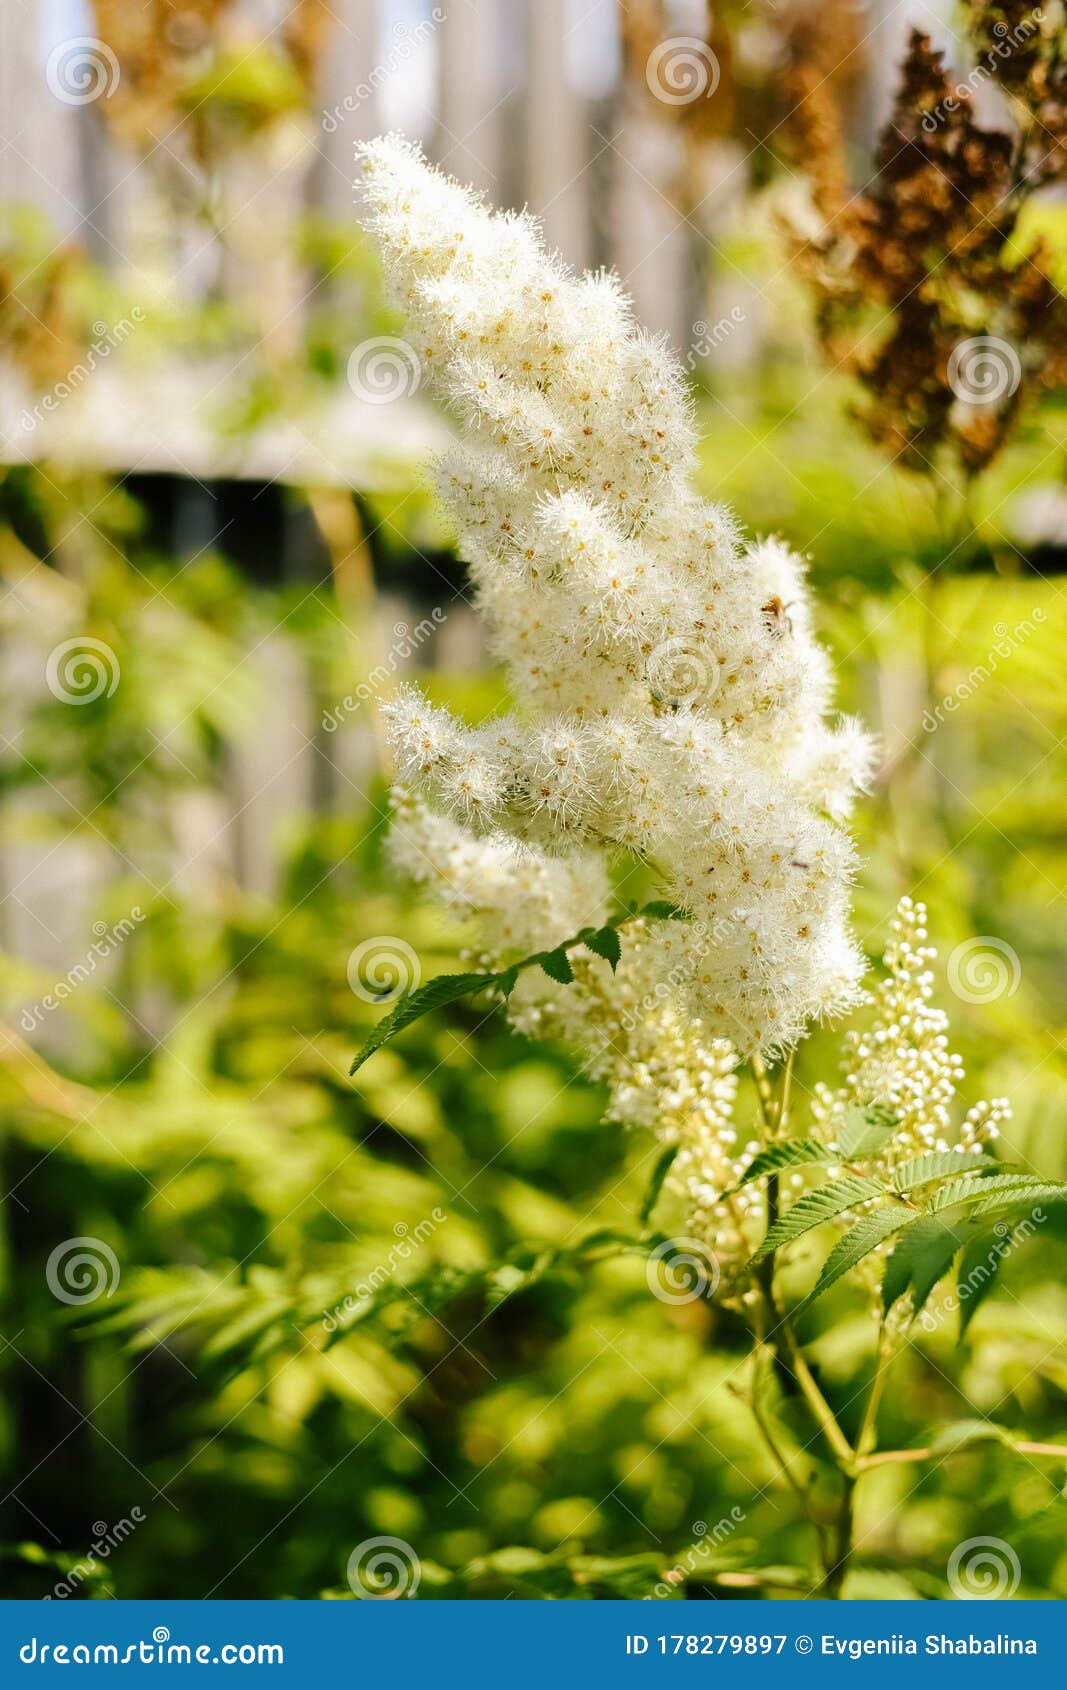 Mountain Ash Flowering in a Flowerbed in a Country Garden Stock Image ...